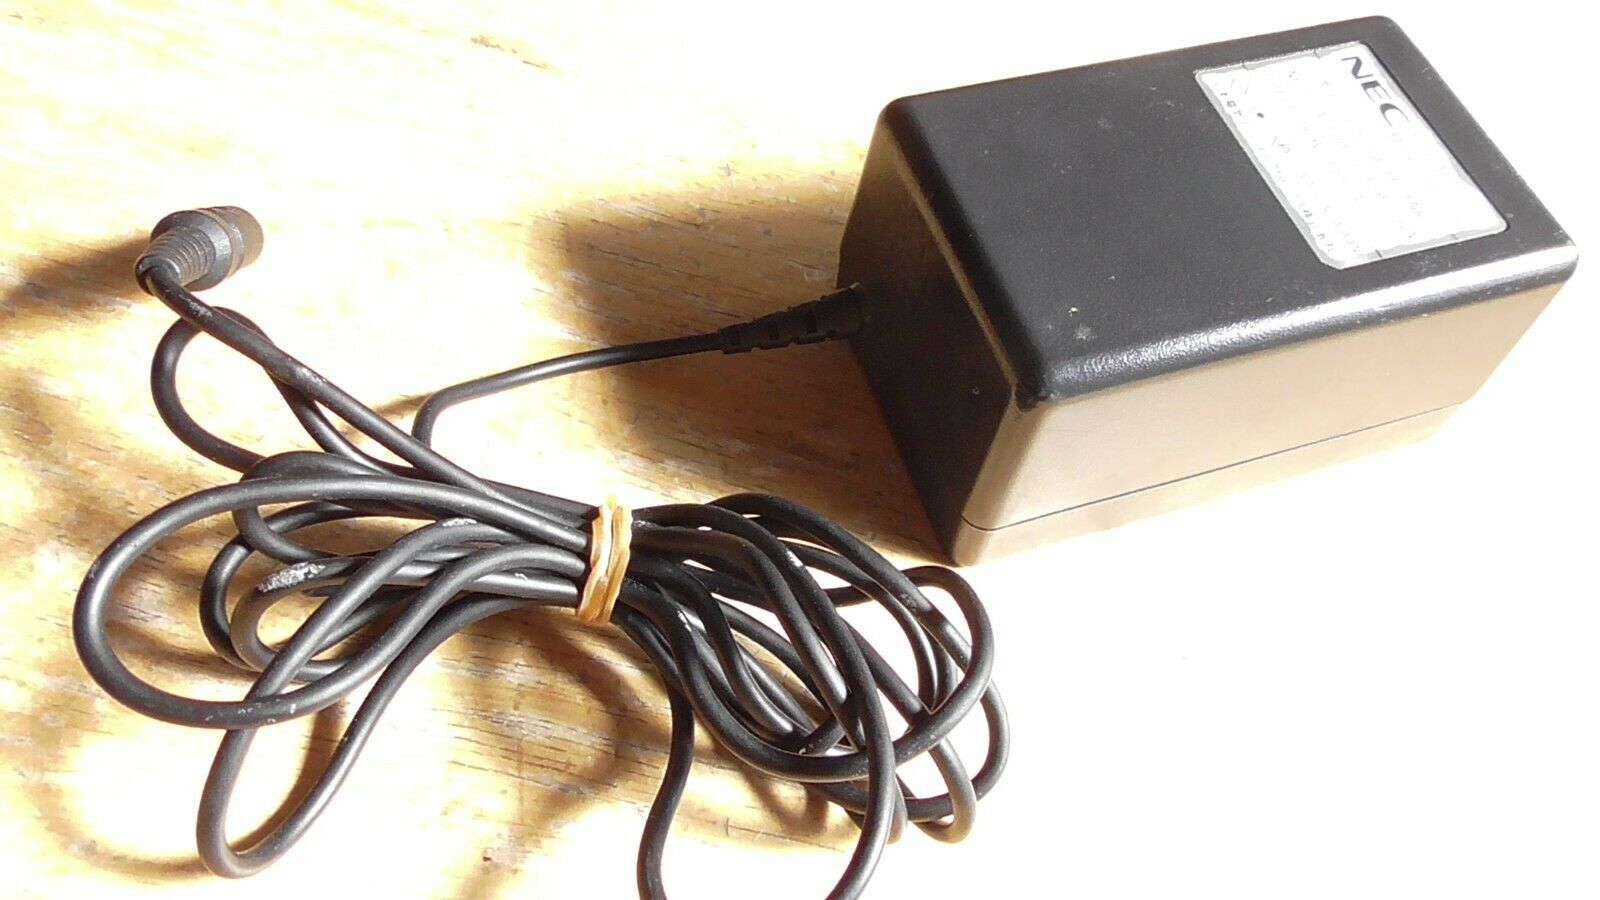 NEC PC Engine Duo-R RX Officiel Original Power Supply PAD-130 PSU AC Adaptateur Connectivity: Wired Type: Ac Adapte - Click Image to Close